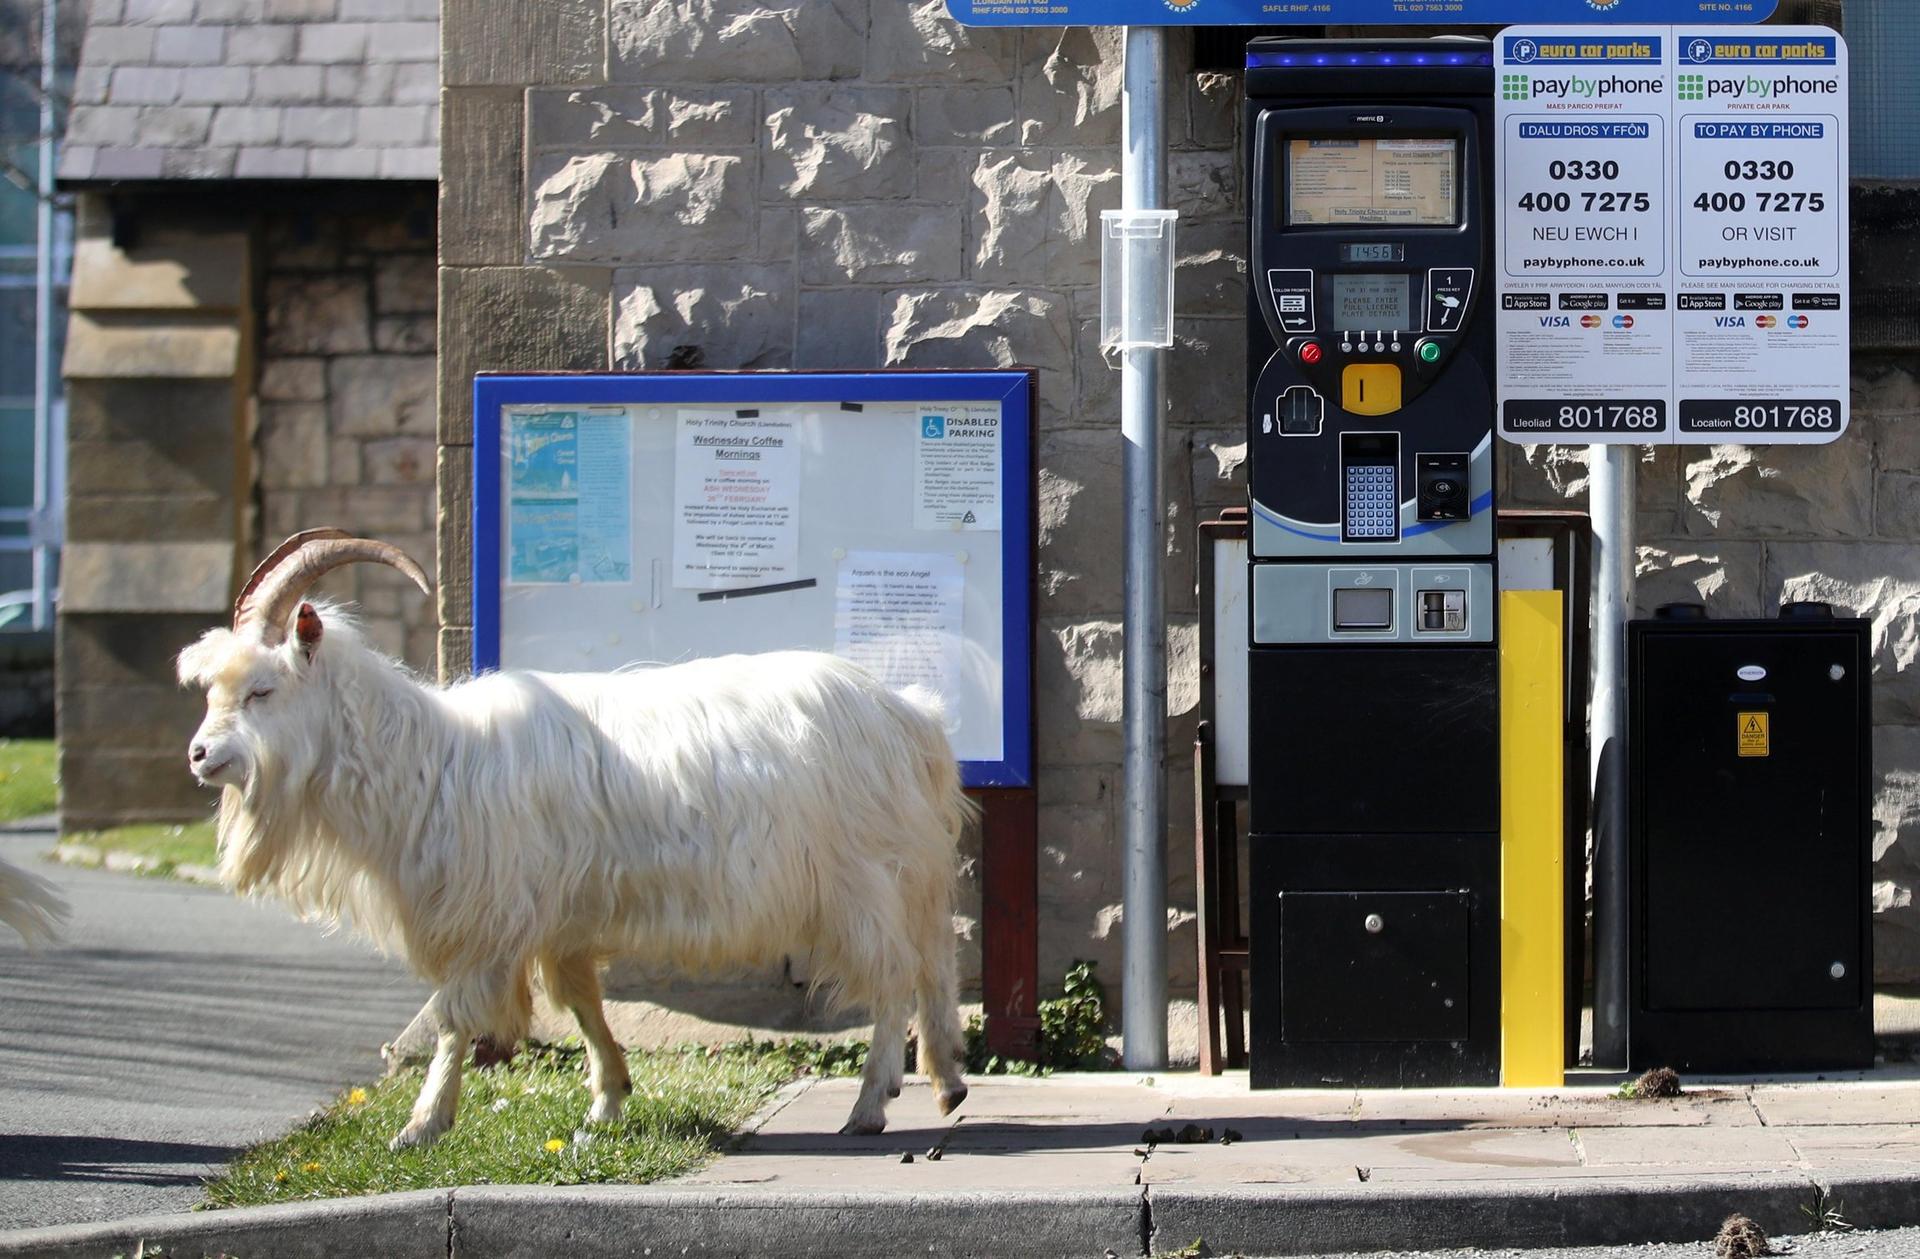 A white goat walks by a parking meter.